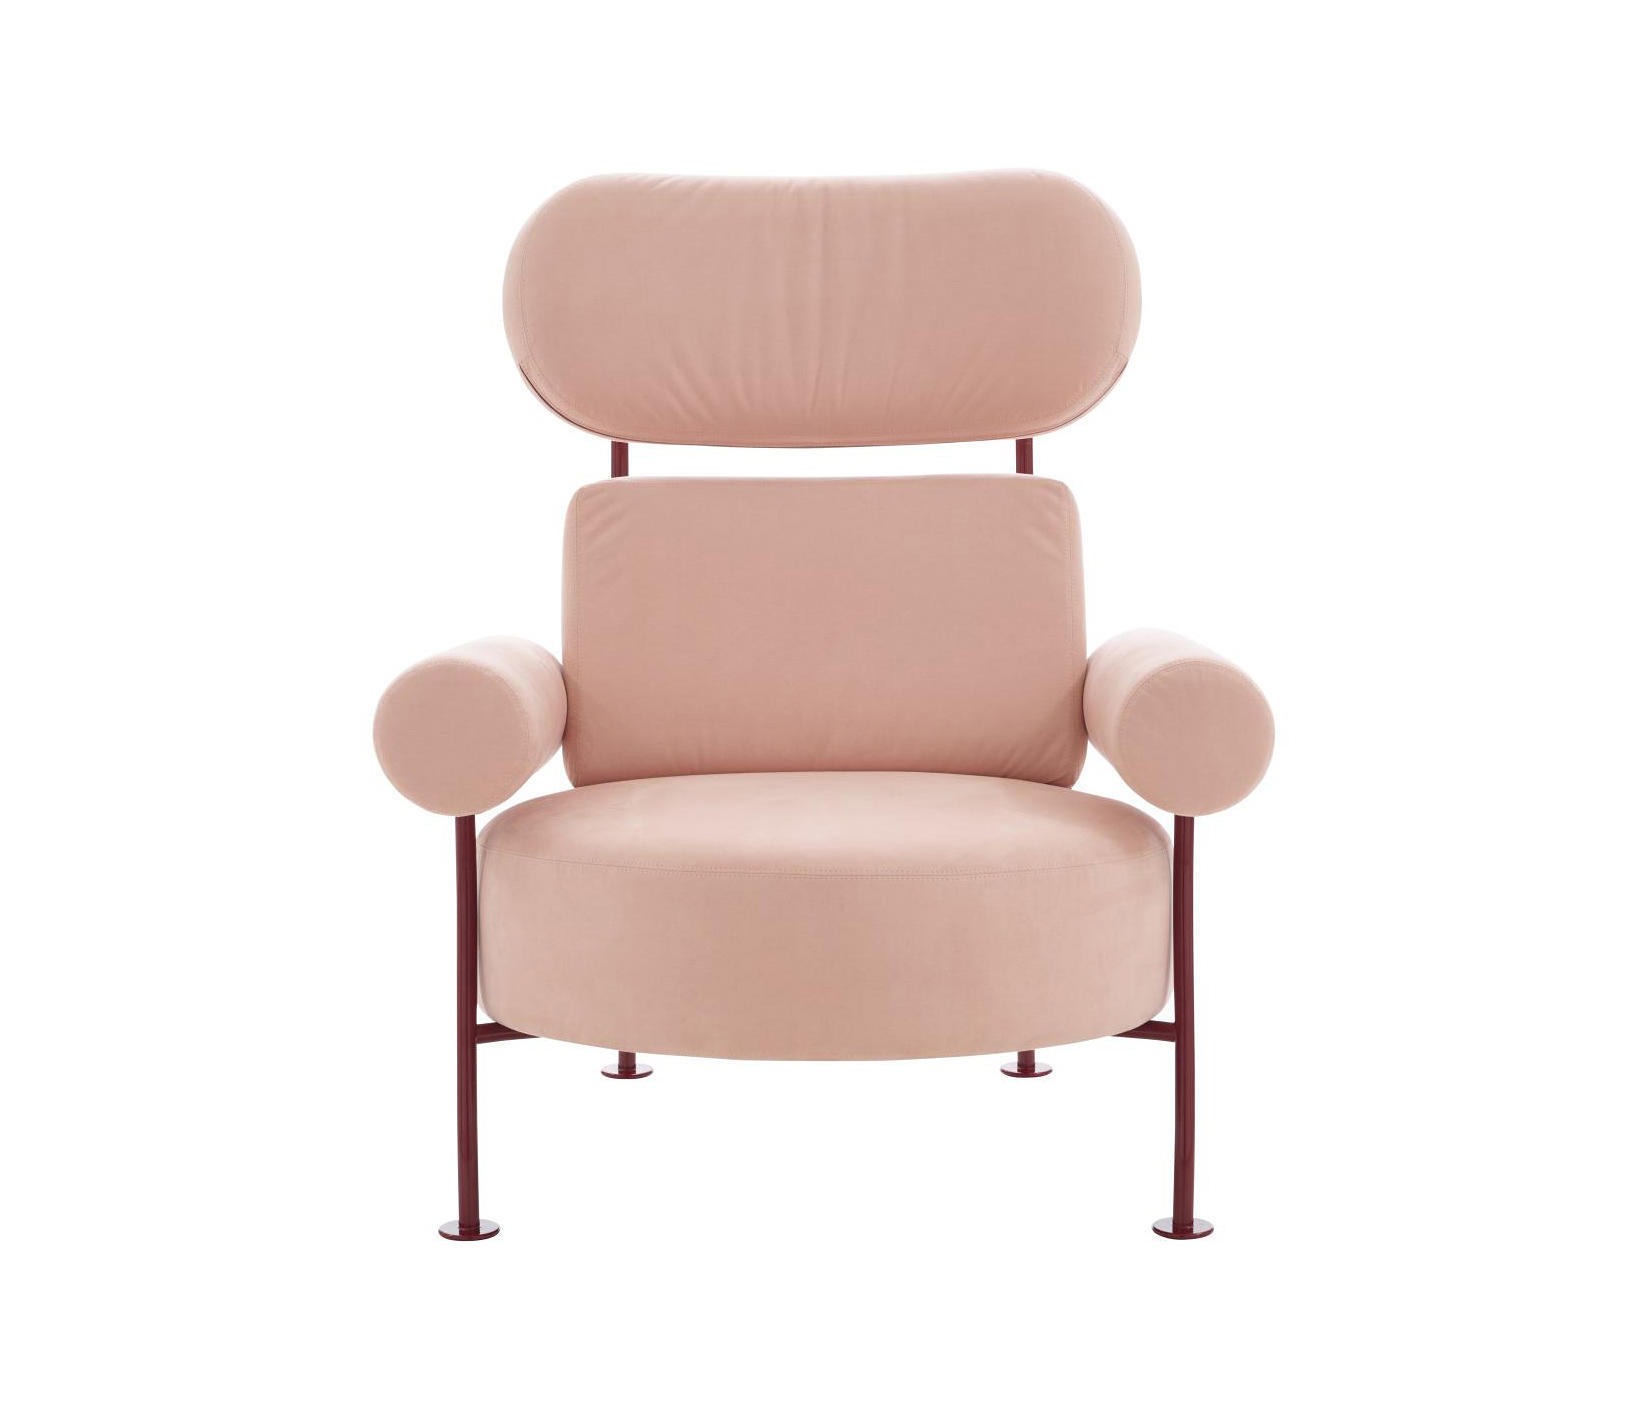 Astair Chair by Pierre Charpin for Ligne Roset